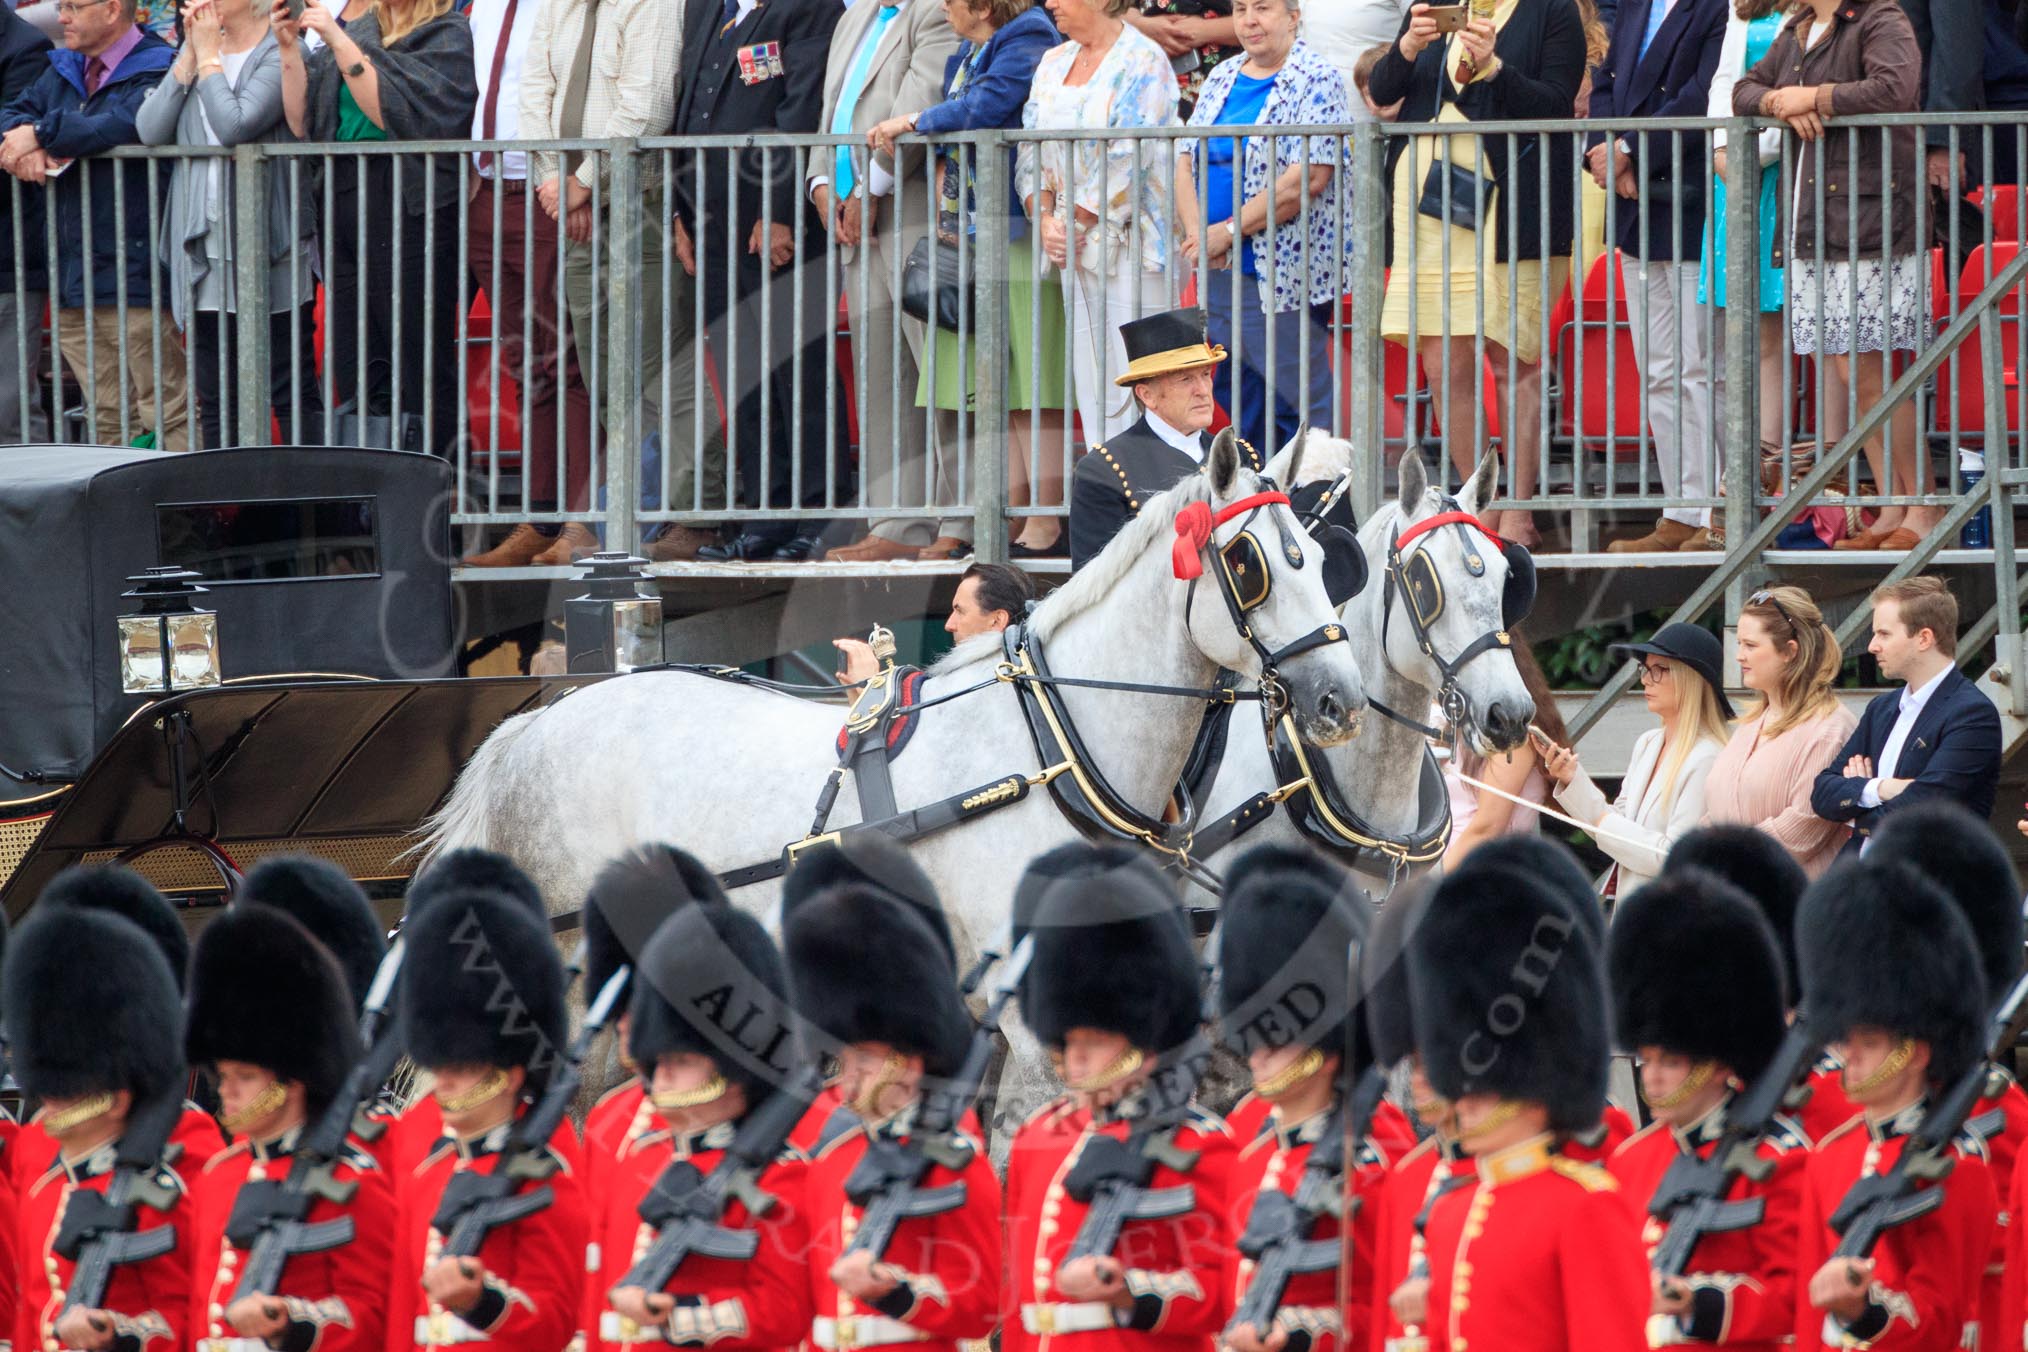 during The Colonel's Review {iptcyear4} (final rehearsal for Trooping the Colour, The Queen's Birthday Parade)  at Horse Guards Parade, Westminster, London, 2 June 2018, 10:58.